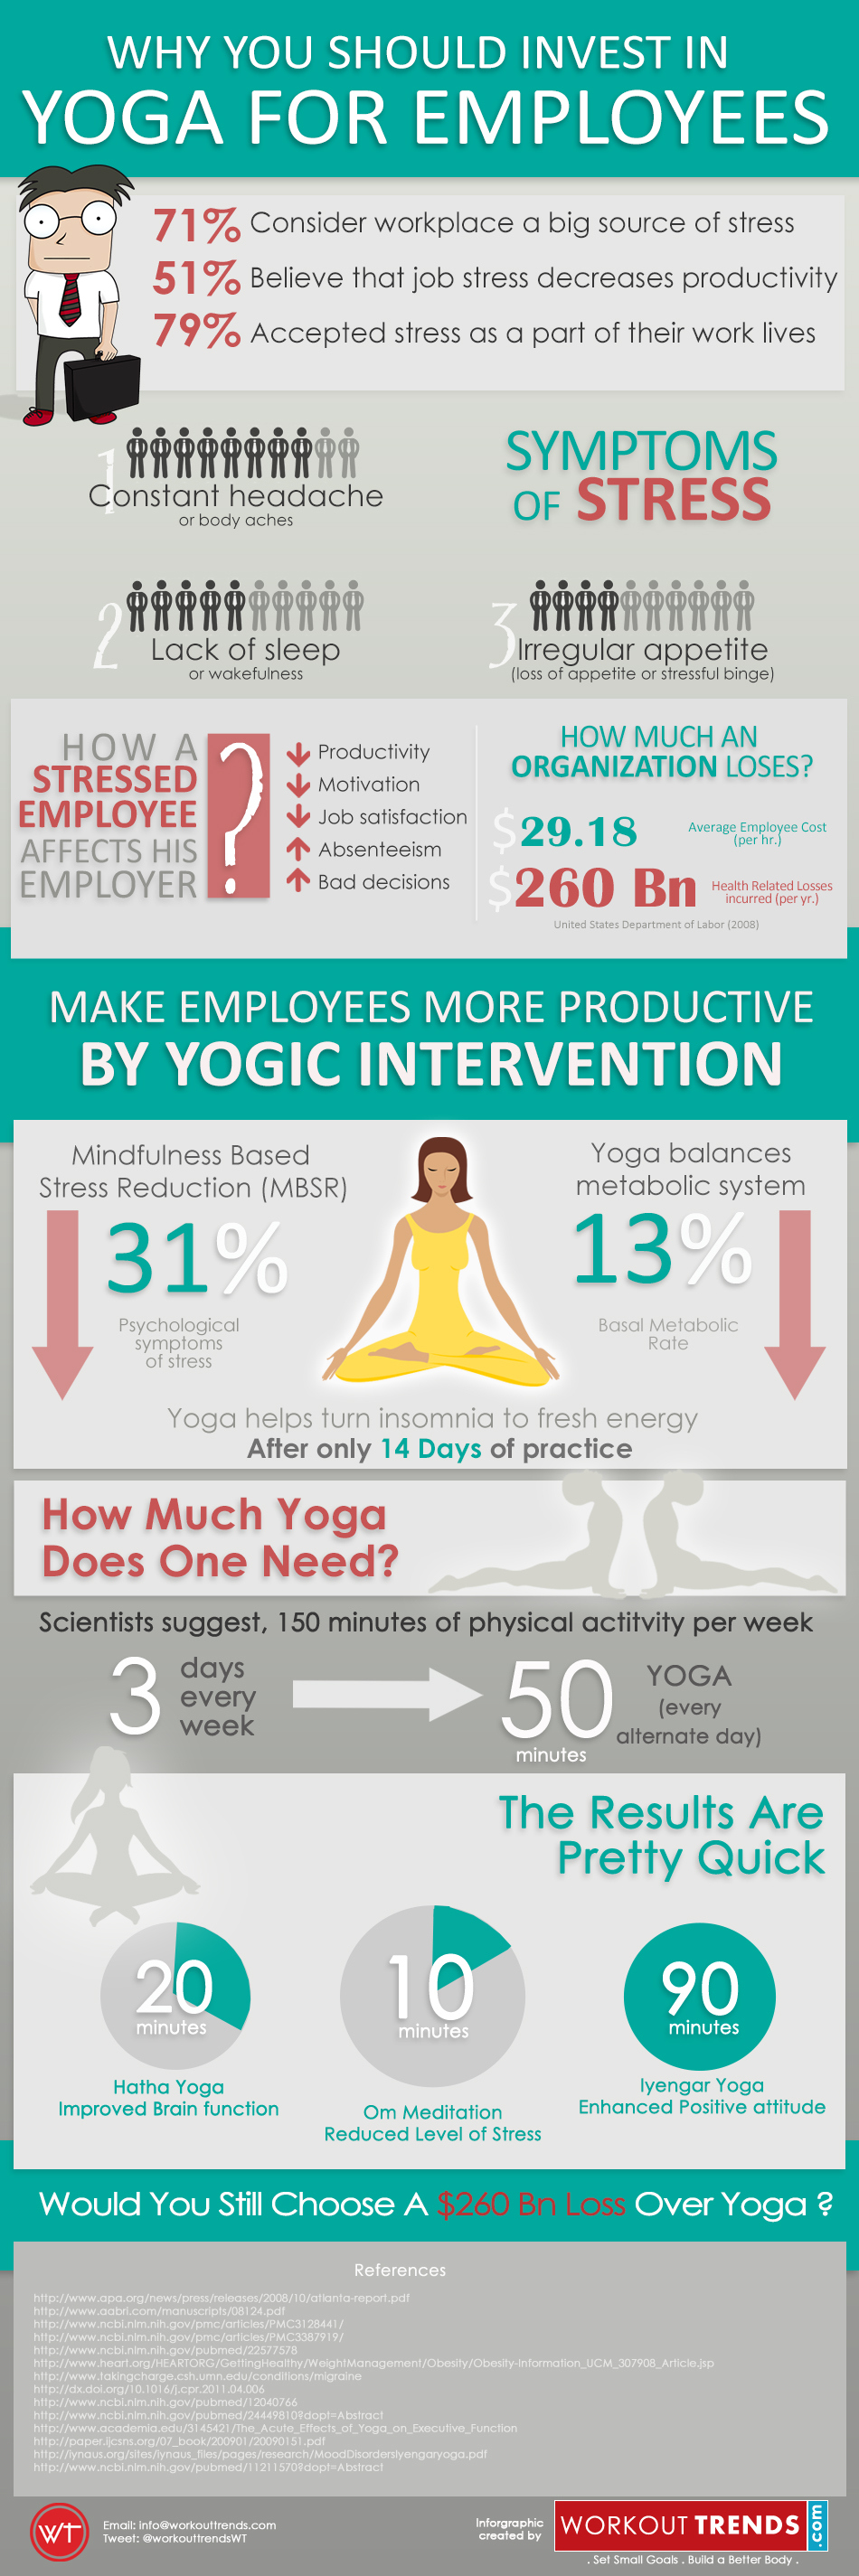 Yoga-for-employees-workout-trends1